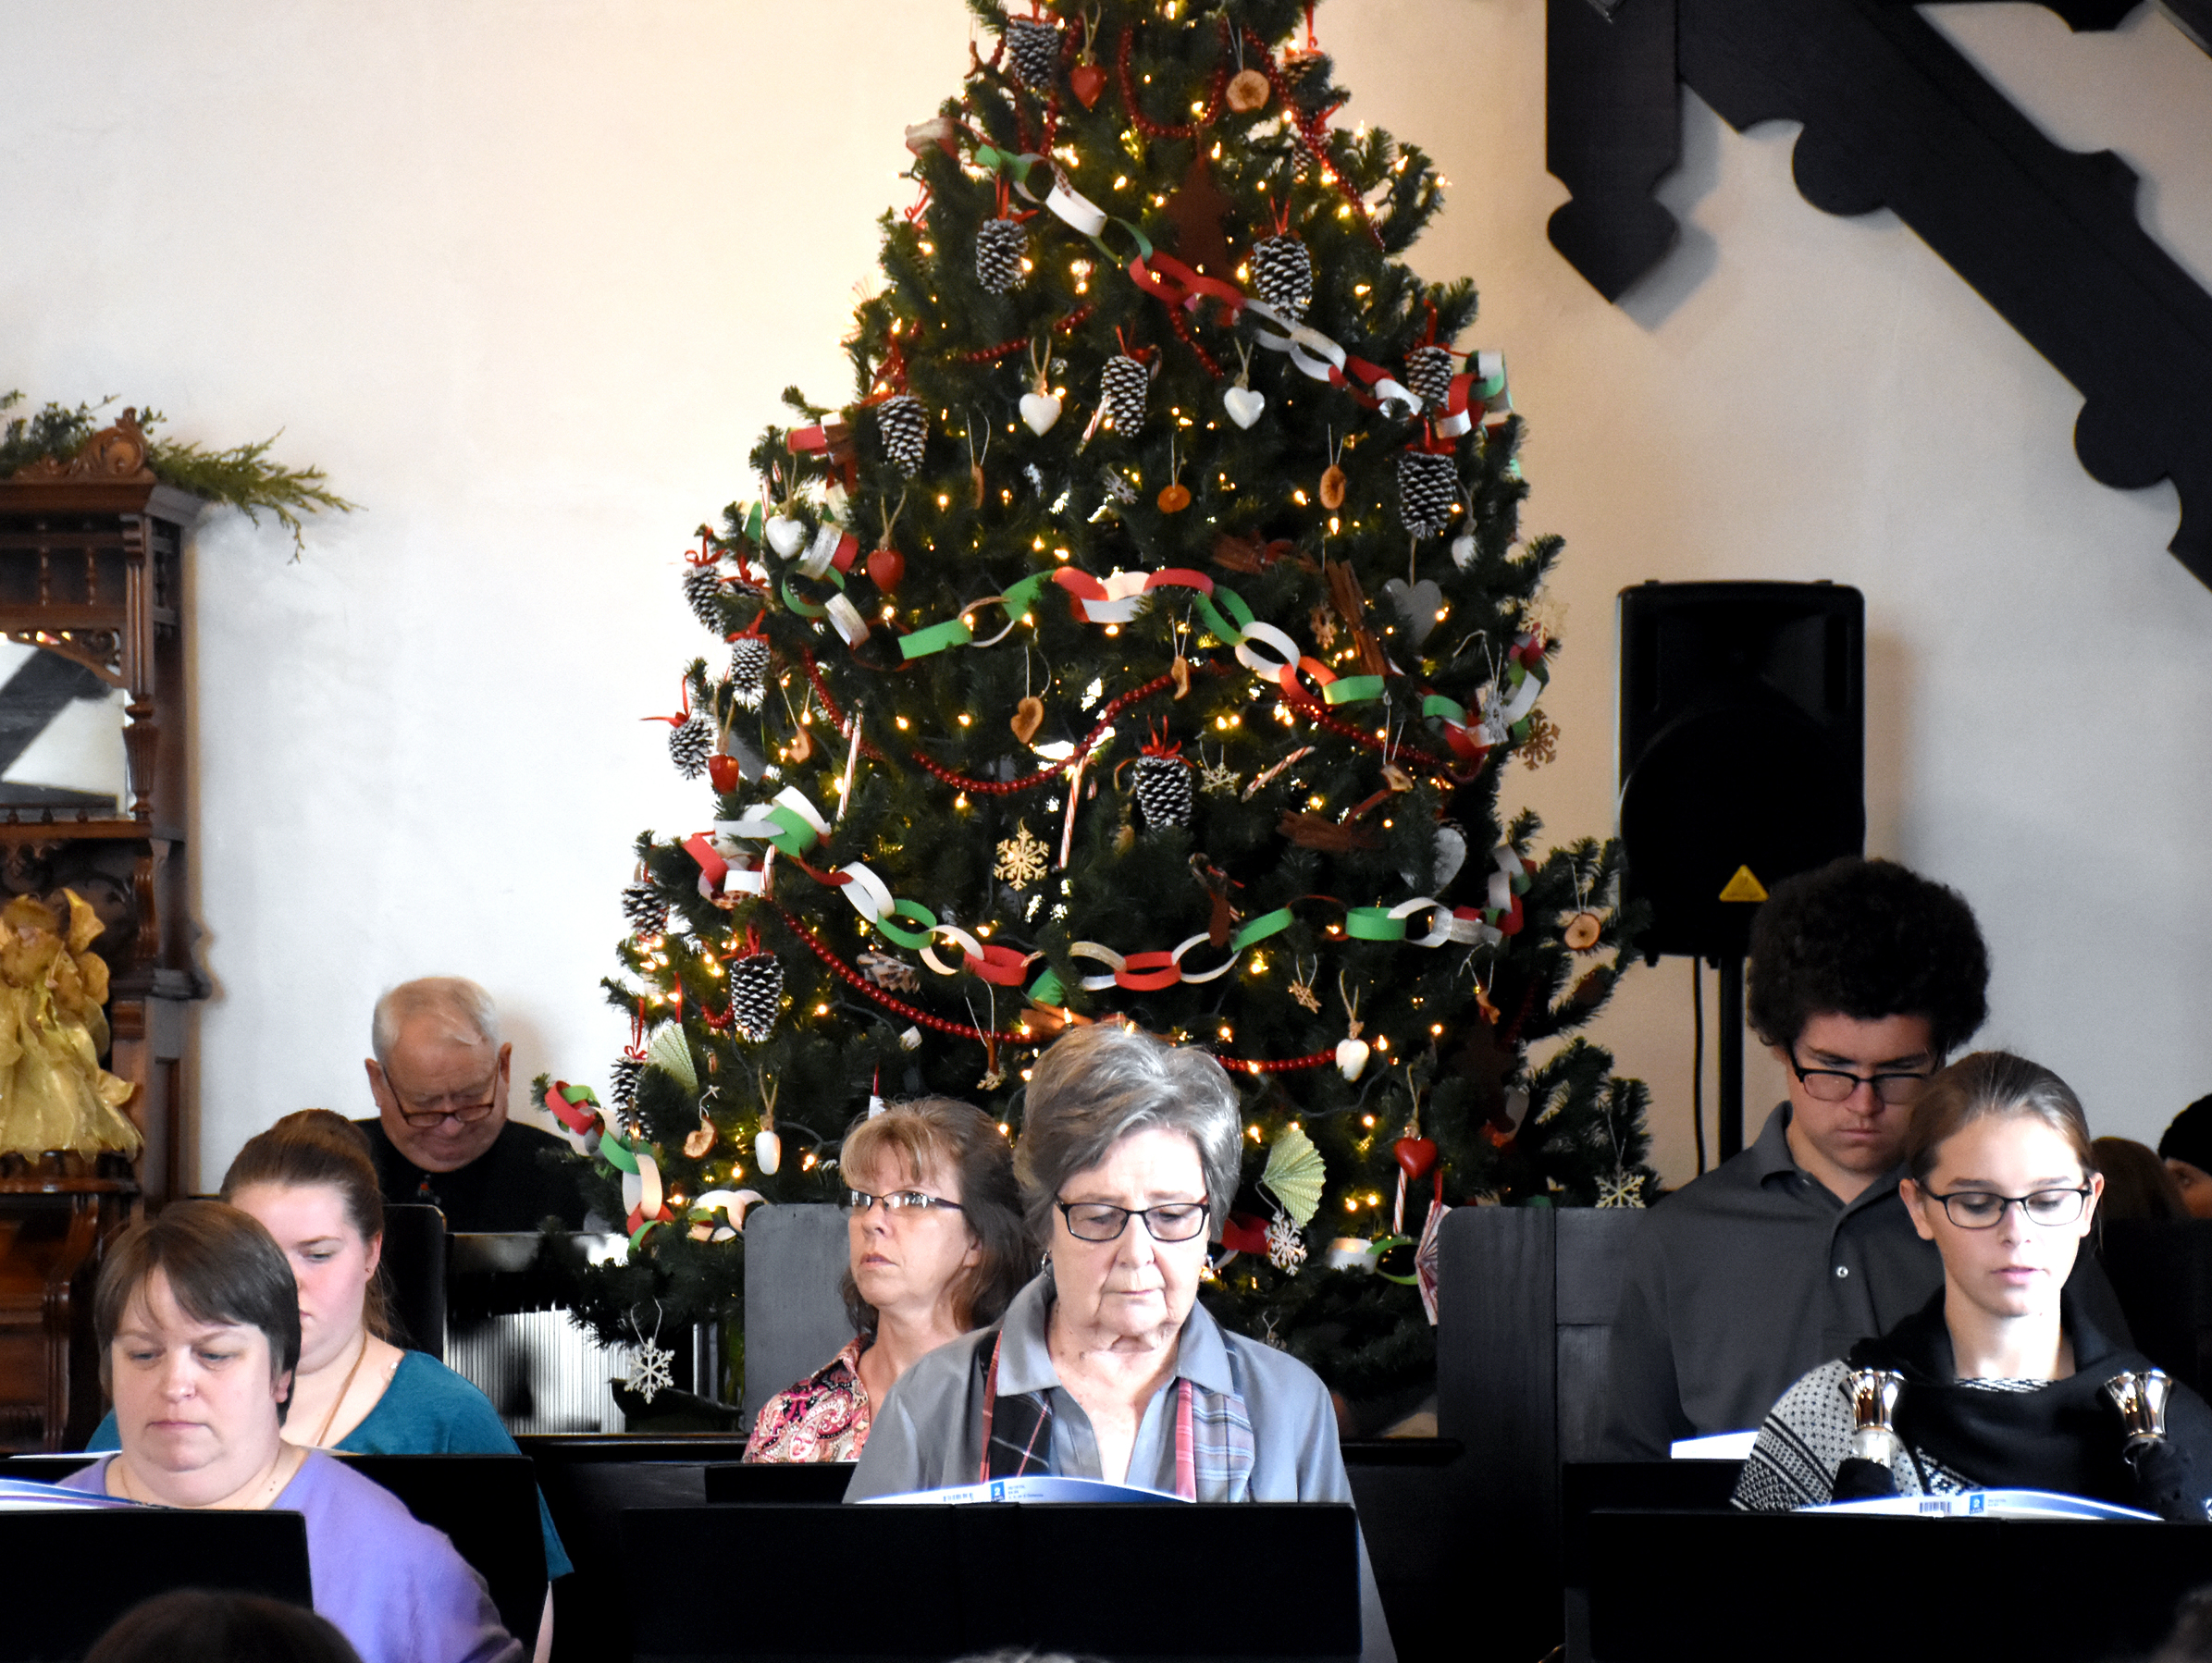 Members of the Agape Handbell Choir from First United Methodist Church present "We Three Kings" Sunday afternoon at the Hometown Christmas program at the Howard County museum in Nashville.